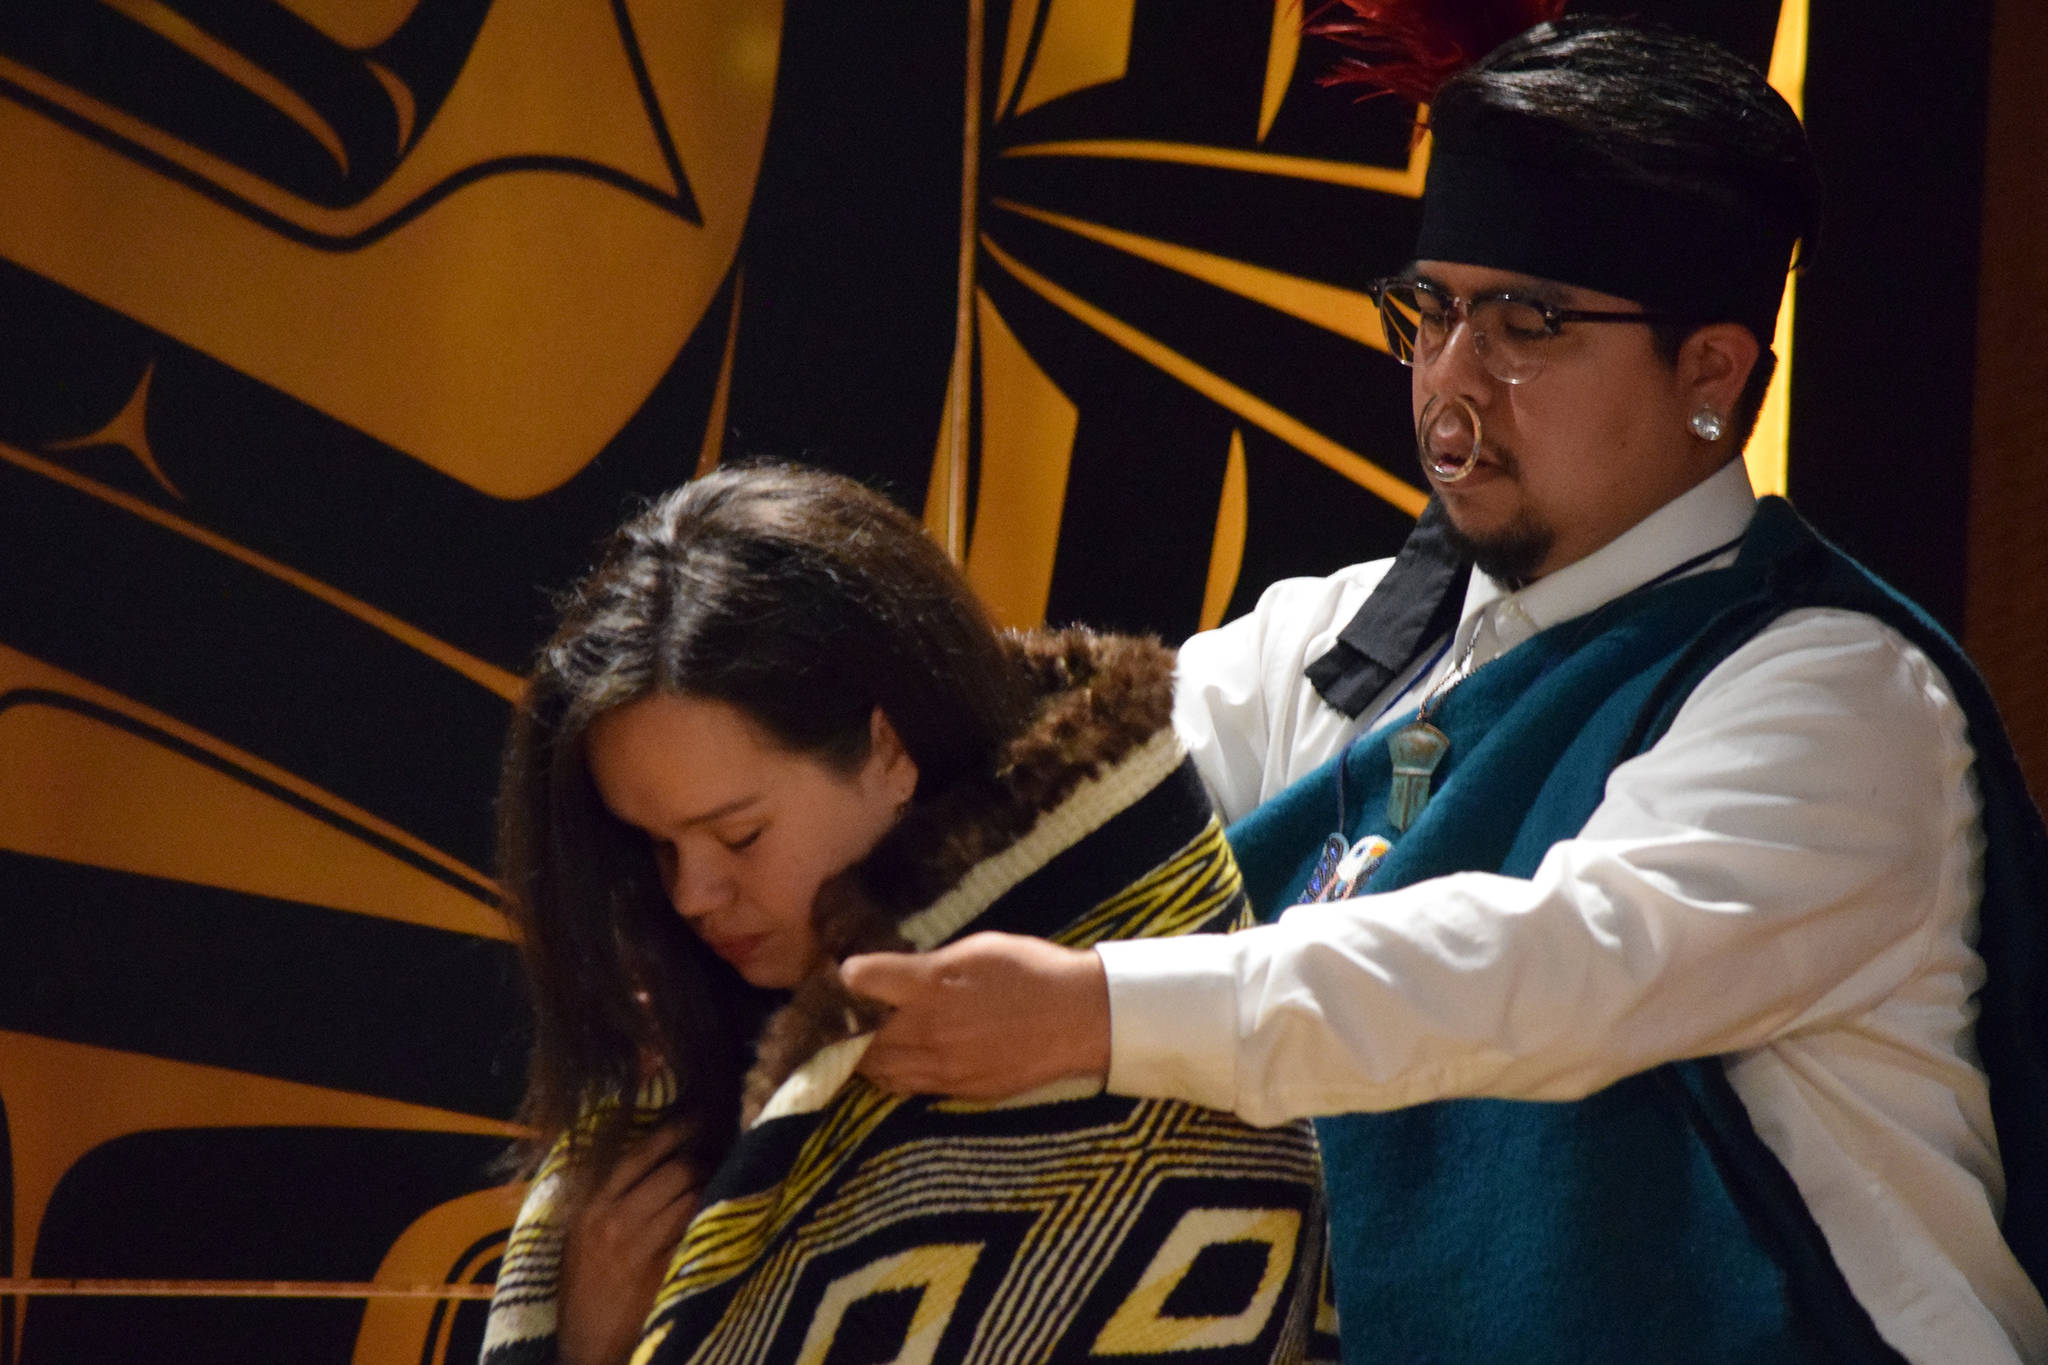 Lily Hope has a robe woven by her mother, Clarissa Rizal, placed on her shoulders by Elijah Marks, Friday, May 31, 2019. (Ben Hohenstatt | Juneau Empire)